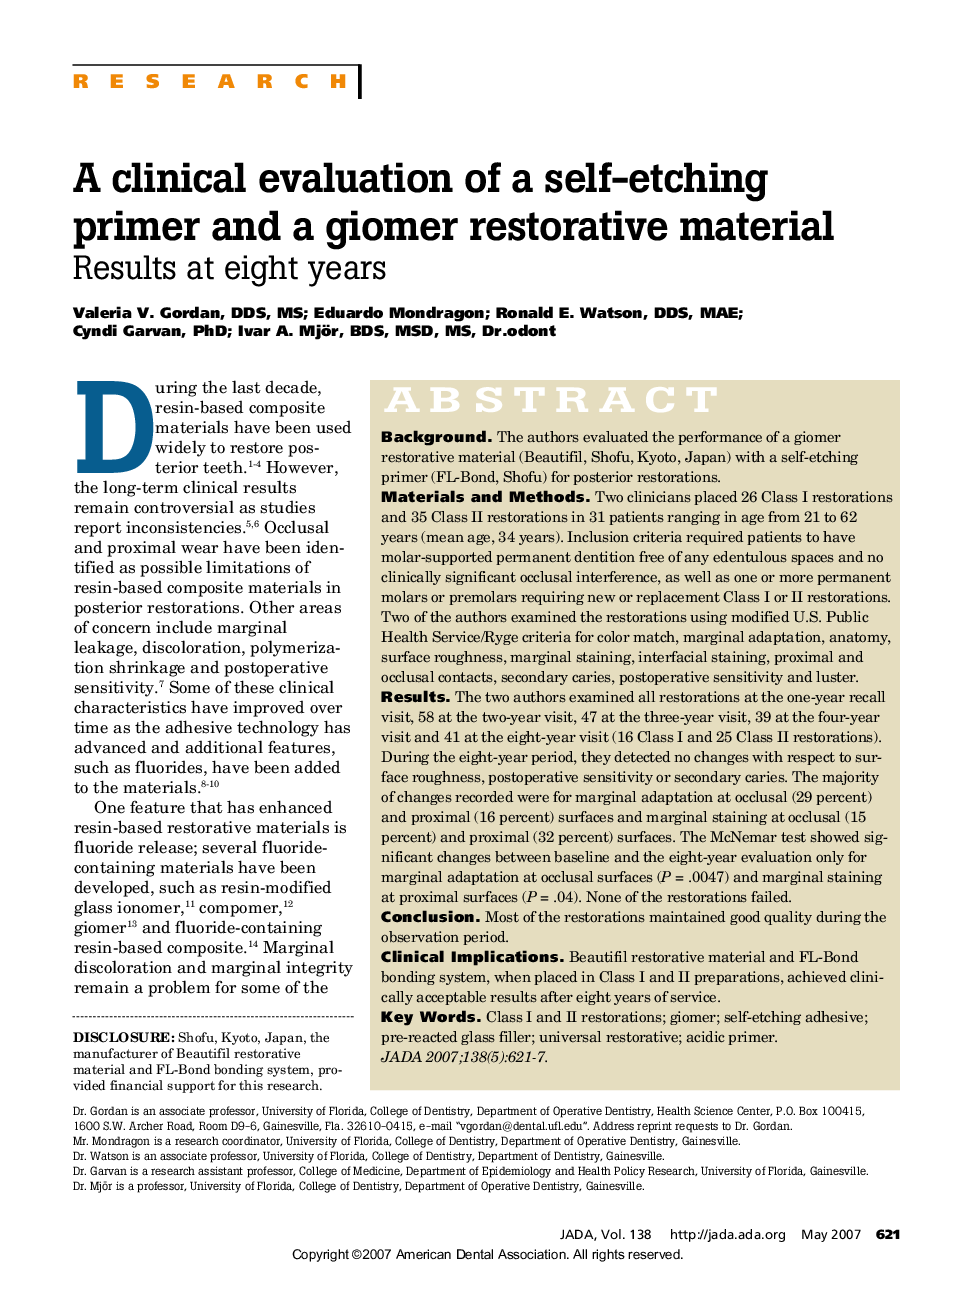 A clinical evaluation of a self-etching primer and a giomer restorative material